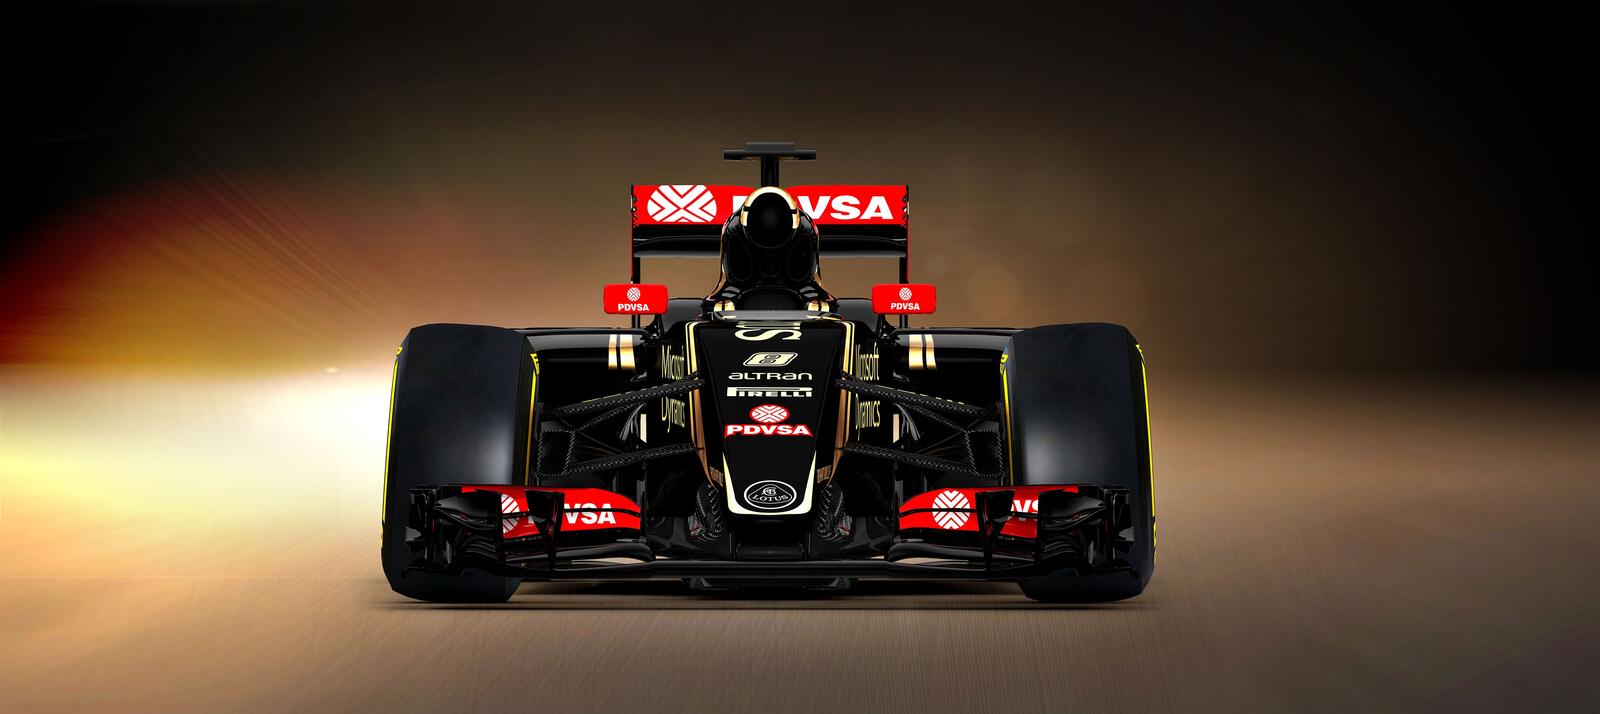 Wallpapers wallpaper formula 1 racing cars black and red on the desktop